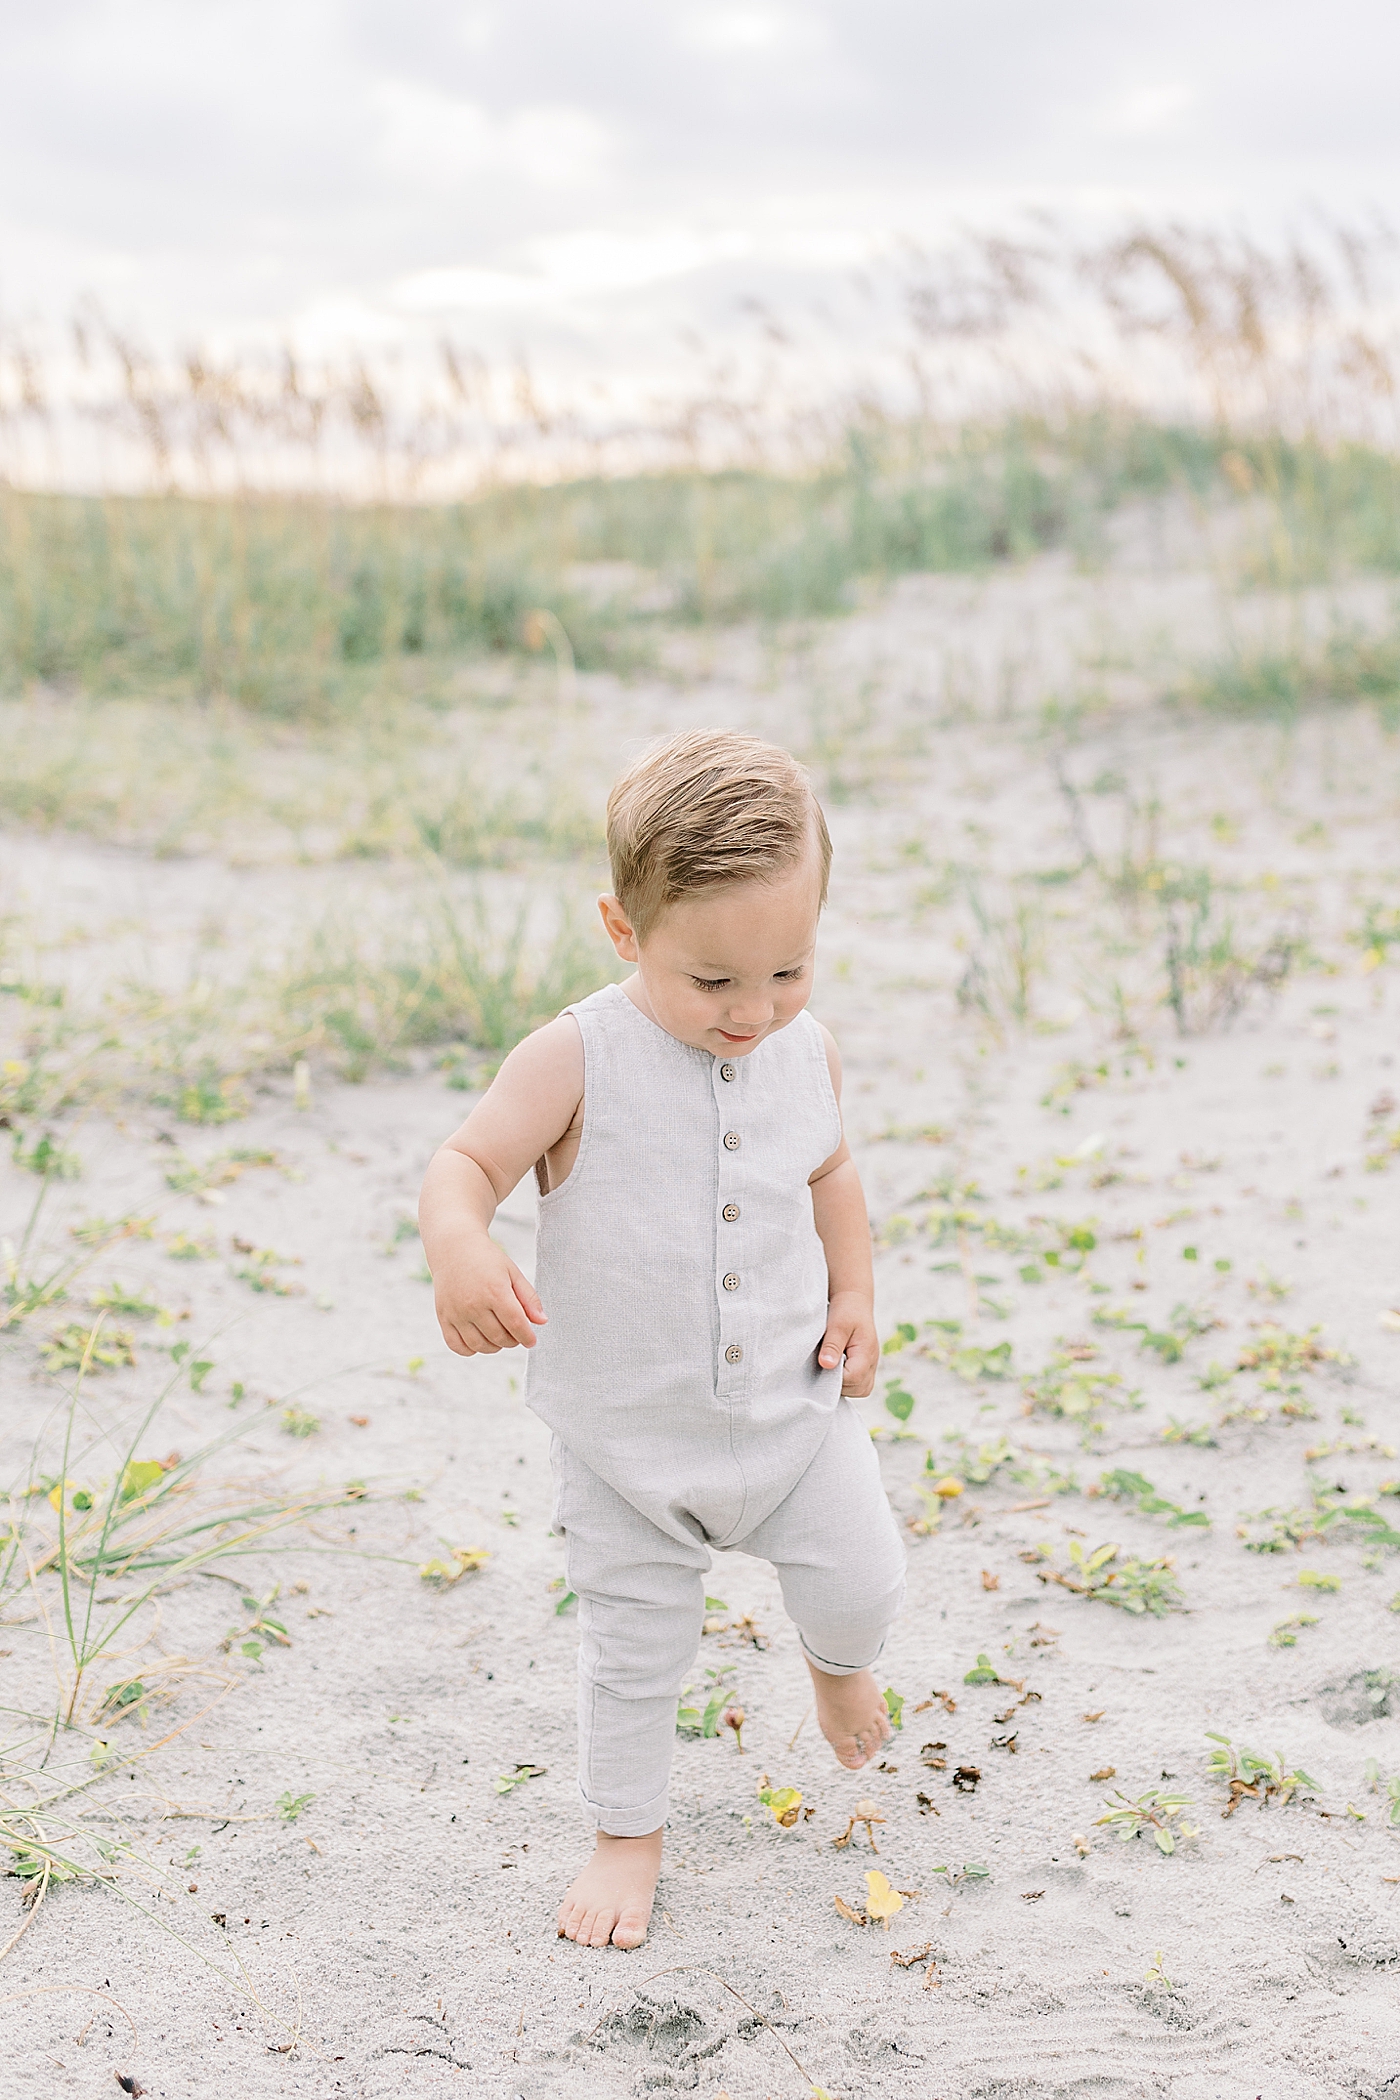 Baby boy walking on the beach | Preparing for Family Beach Session with Caitlyn Motycka